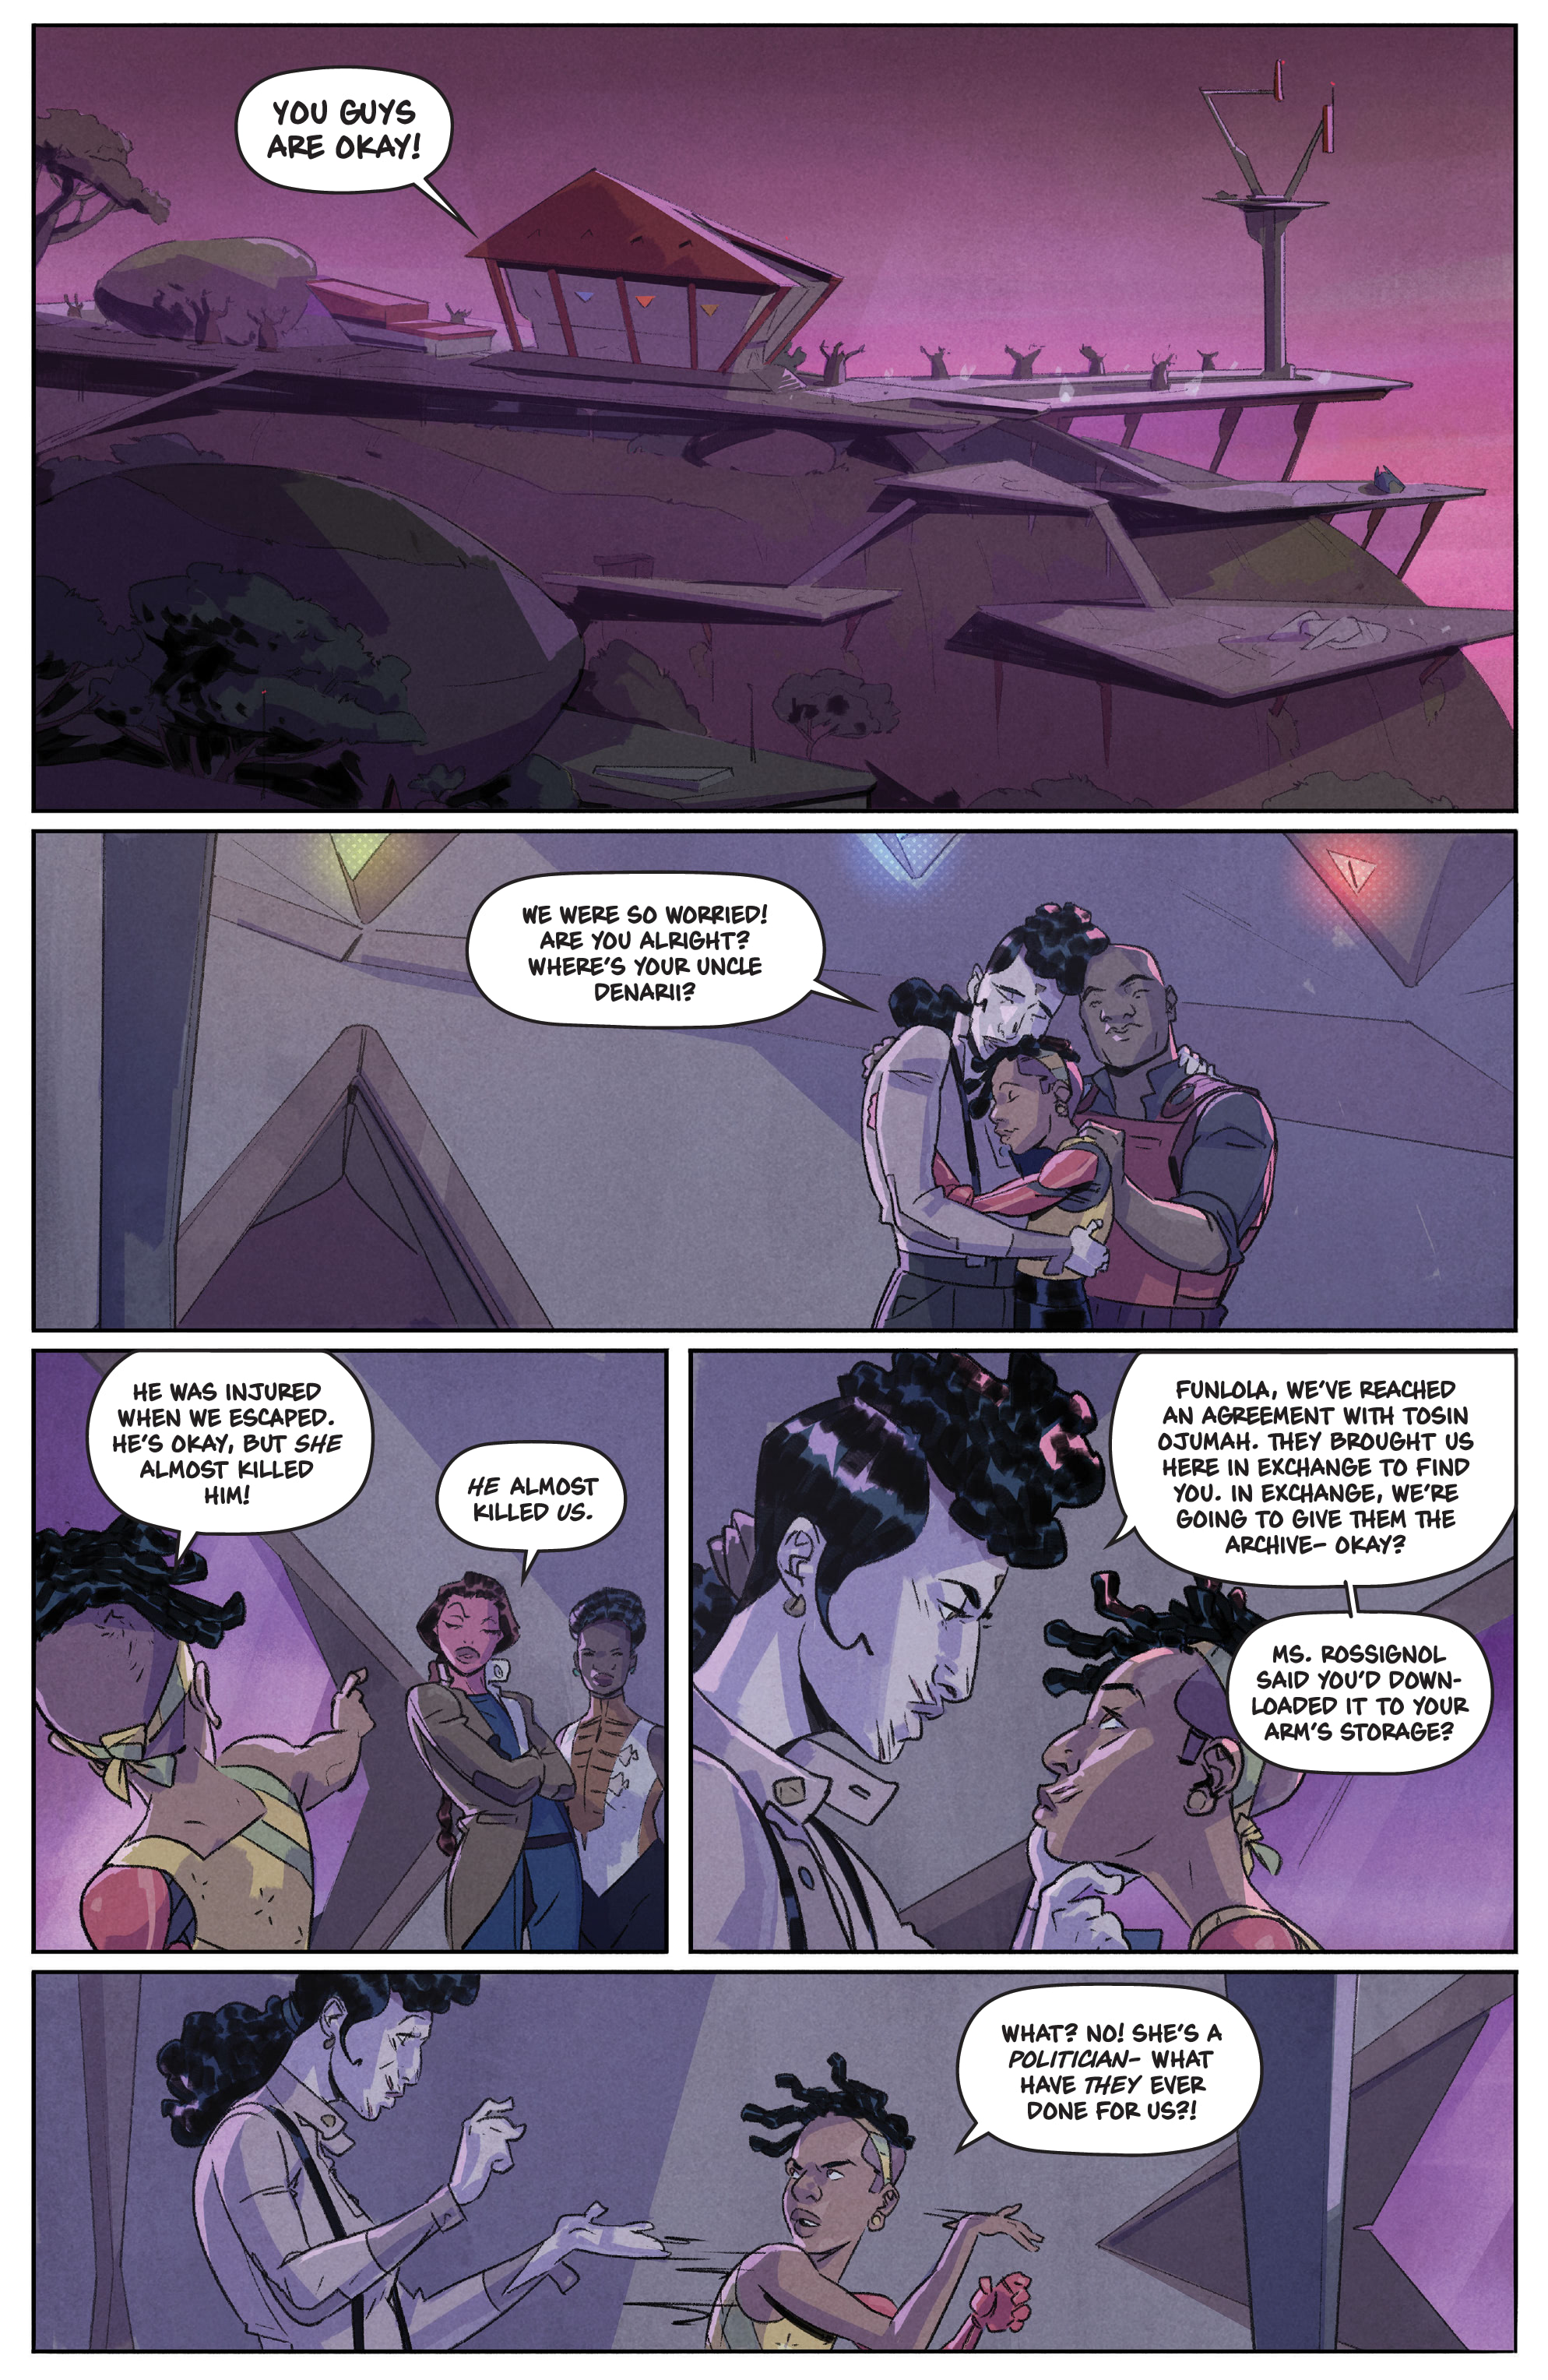 New Masters (2022-): Chapter 6 - Page 4